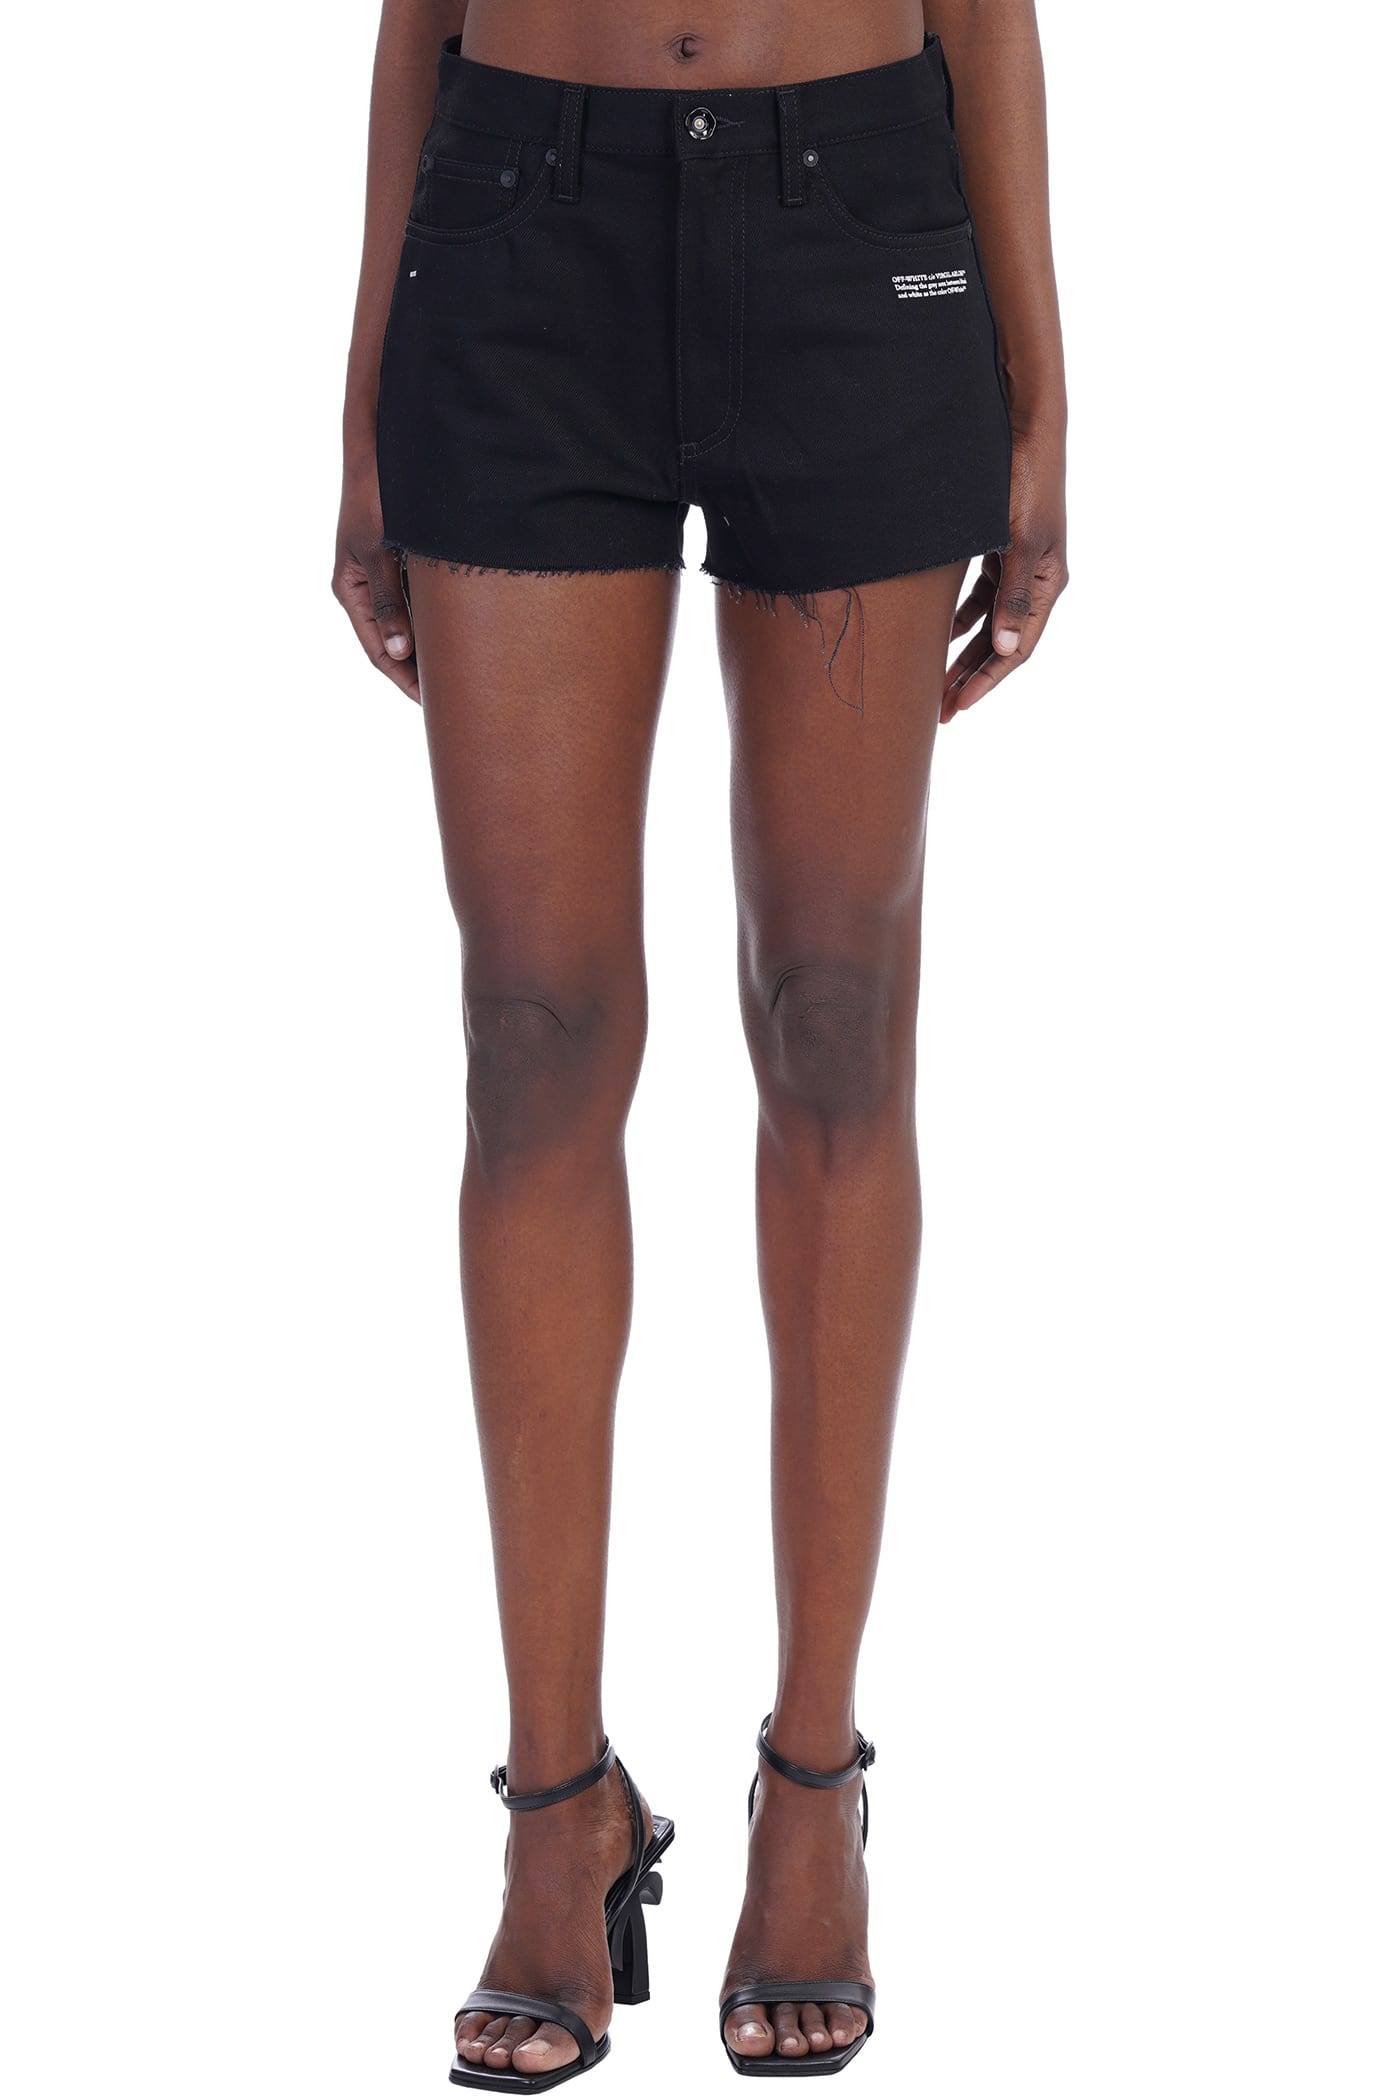 Off-White Shorts In Black Cotton